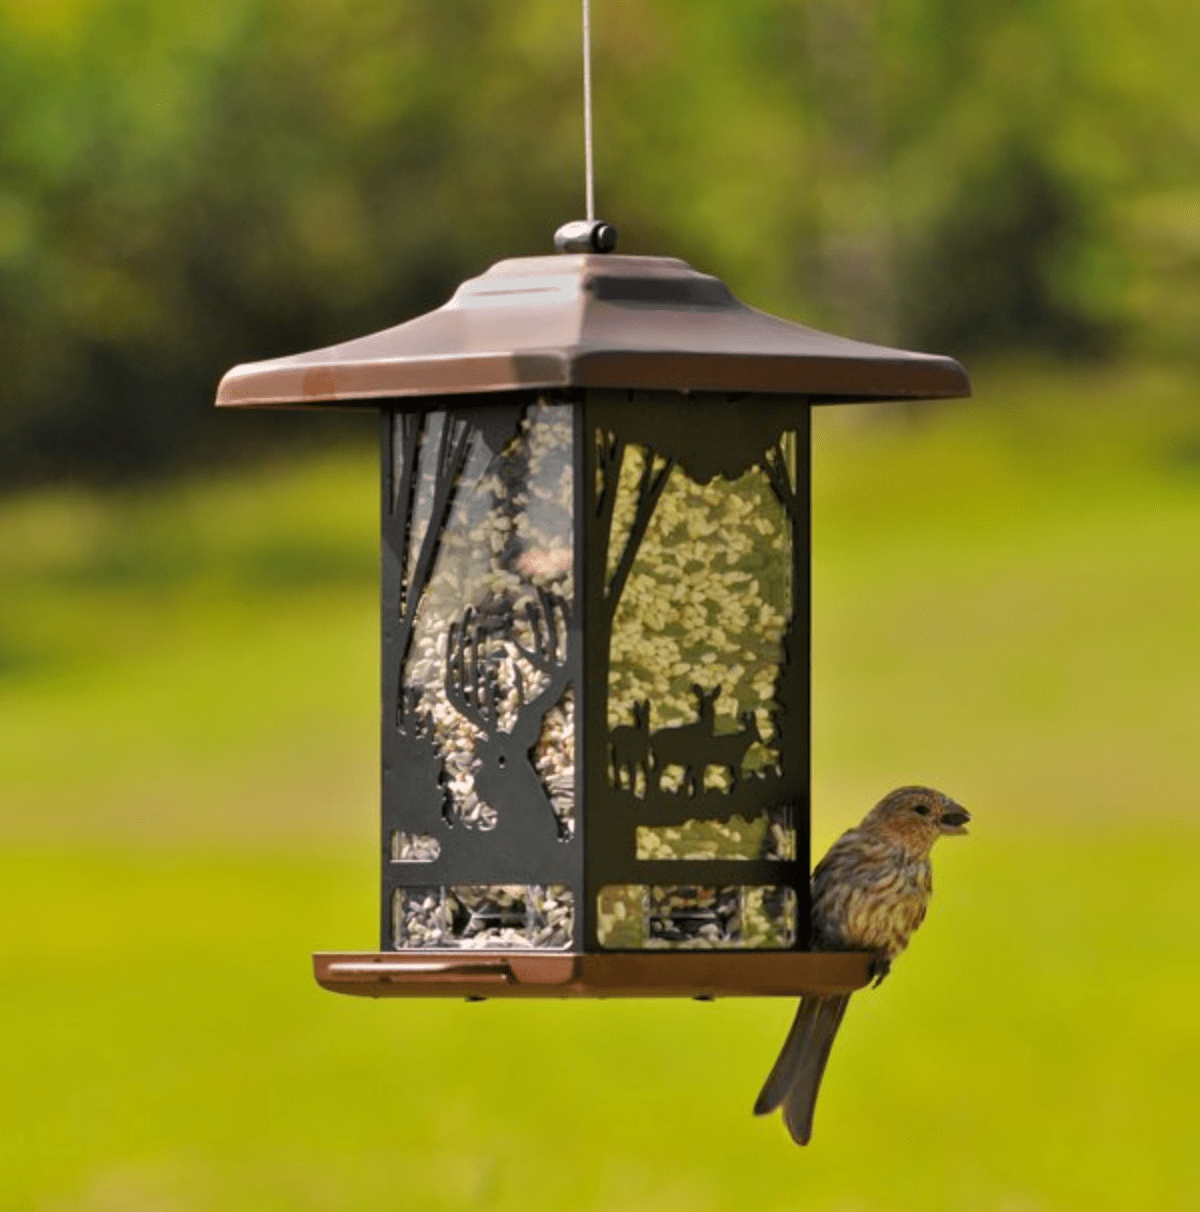 9 Hopper Bird Feeders to Attract Seed-Lovers